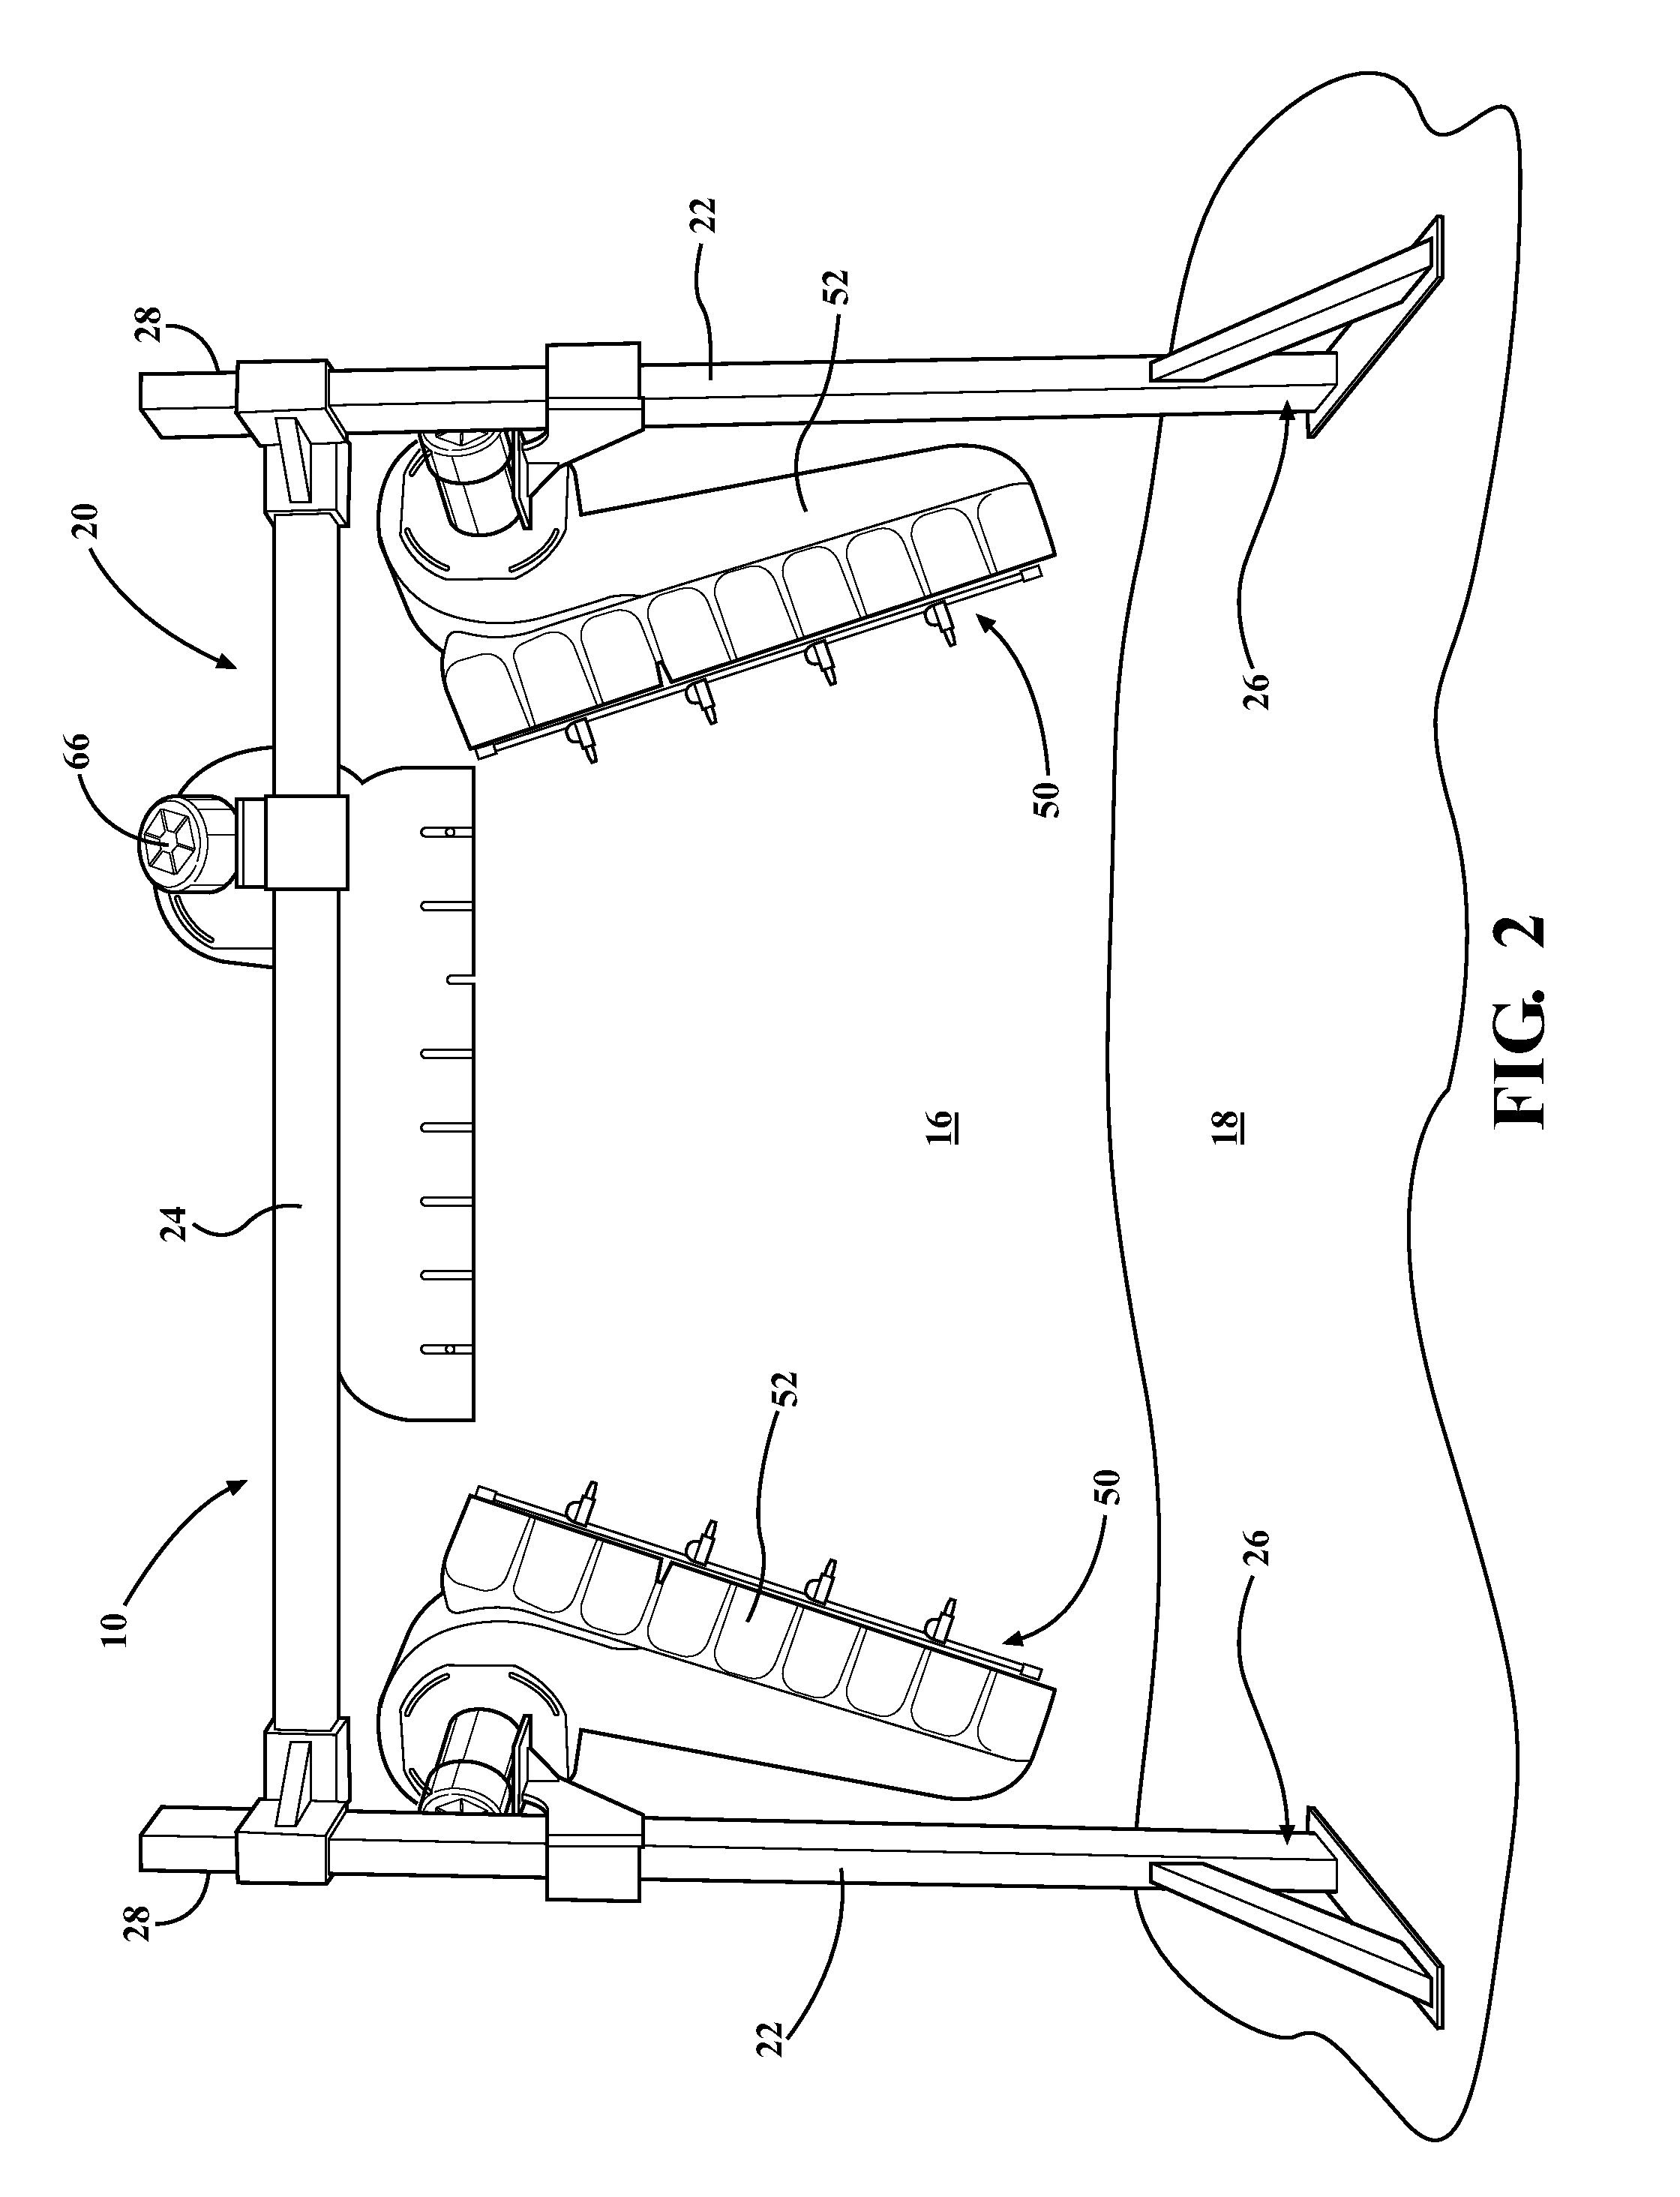 Vehicle treatment apparatus that emits air and water